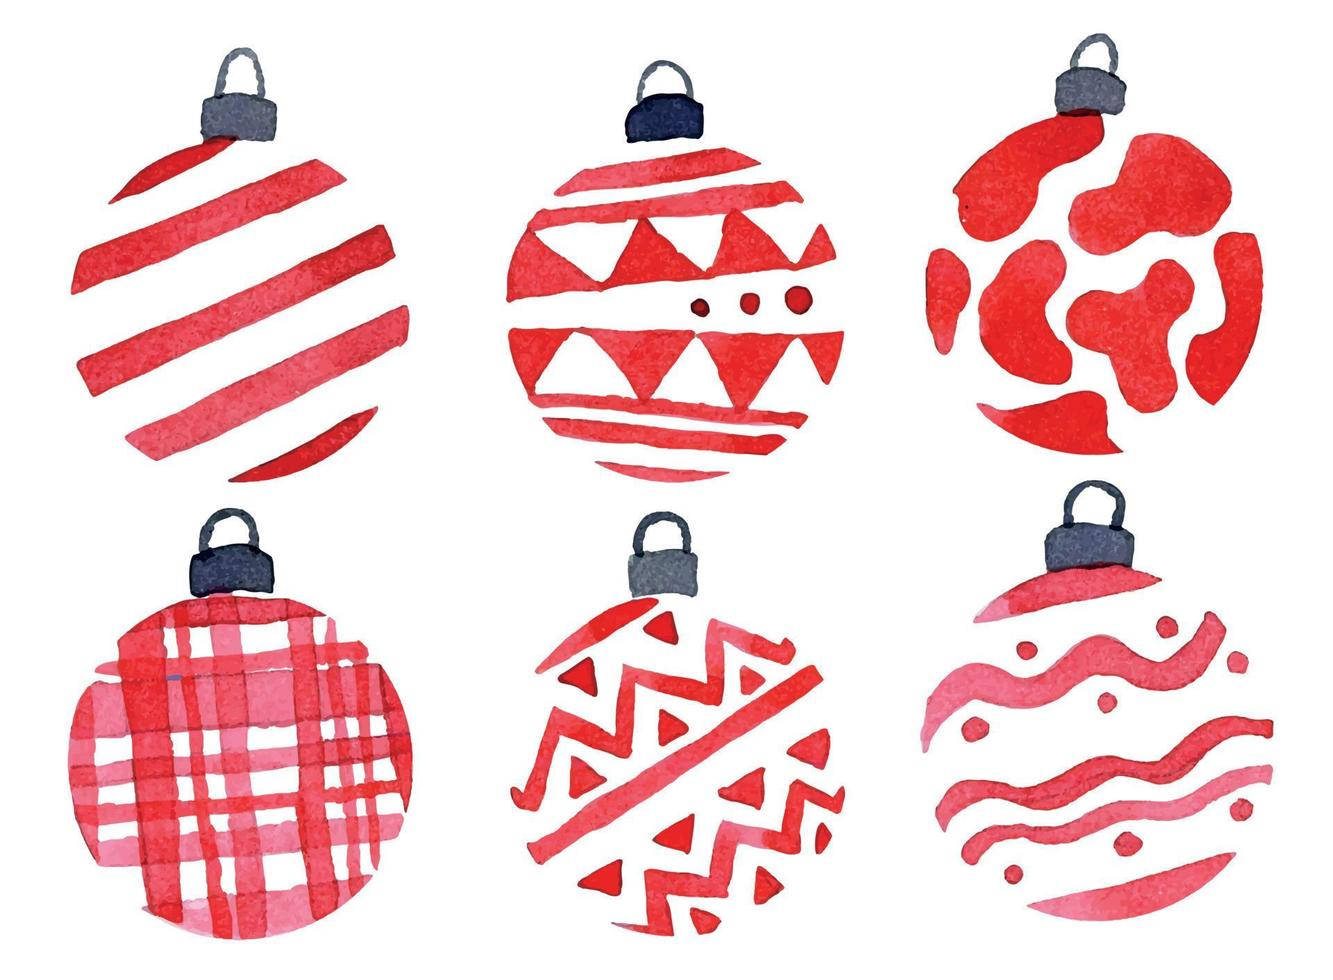 watercolor drawing set with Christmas tree toys, balls. balls of red color with a simple ornament. abstract holiday decorations new year, christmas vector